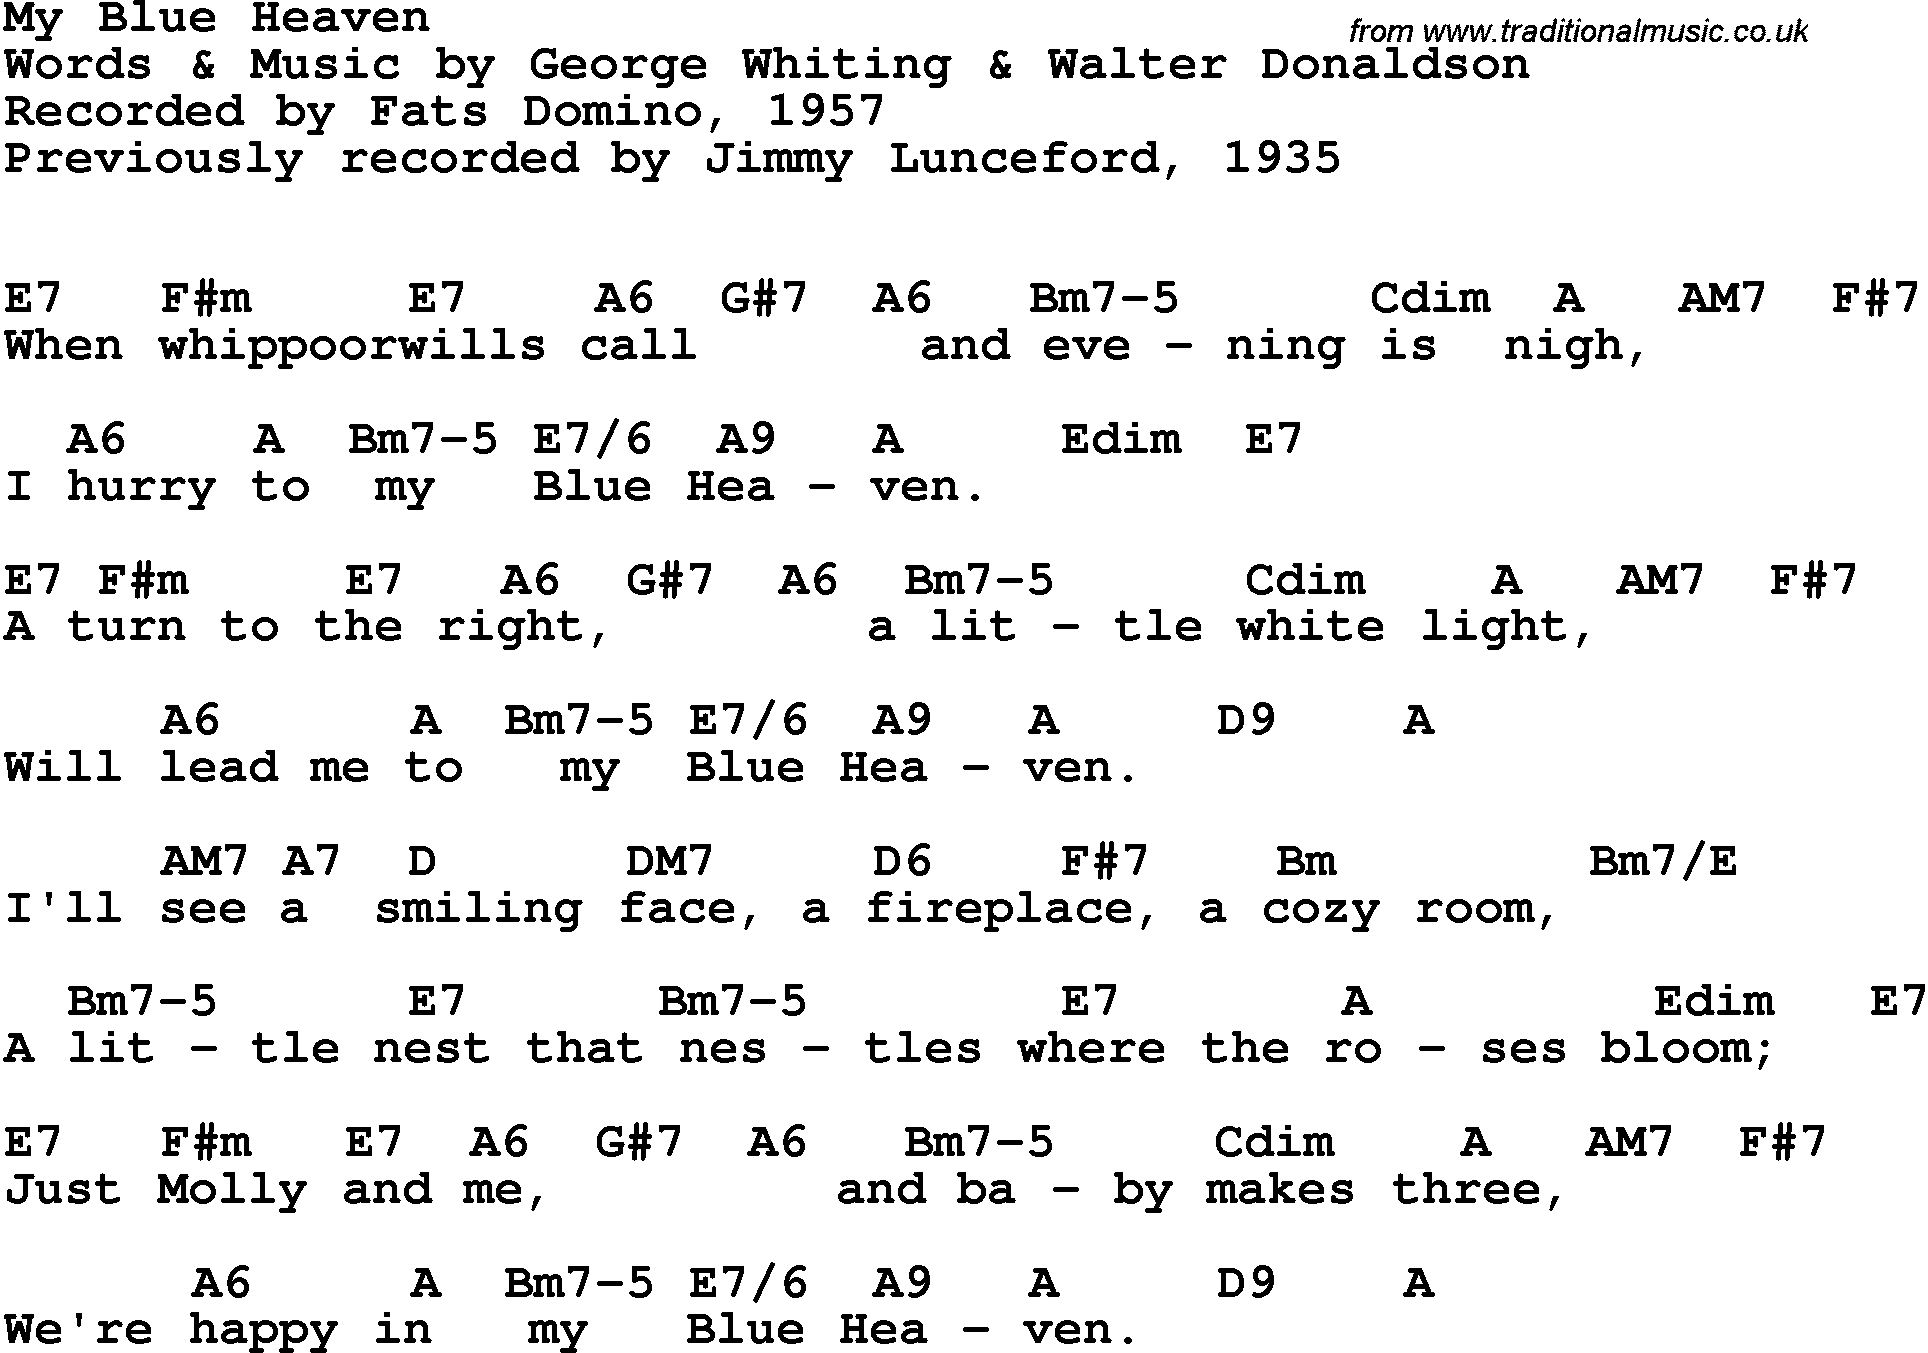 Song Lyrics with guitar chords for My Blue Heaven - Fats Domino, 1947